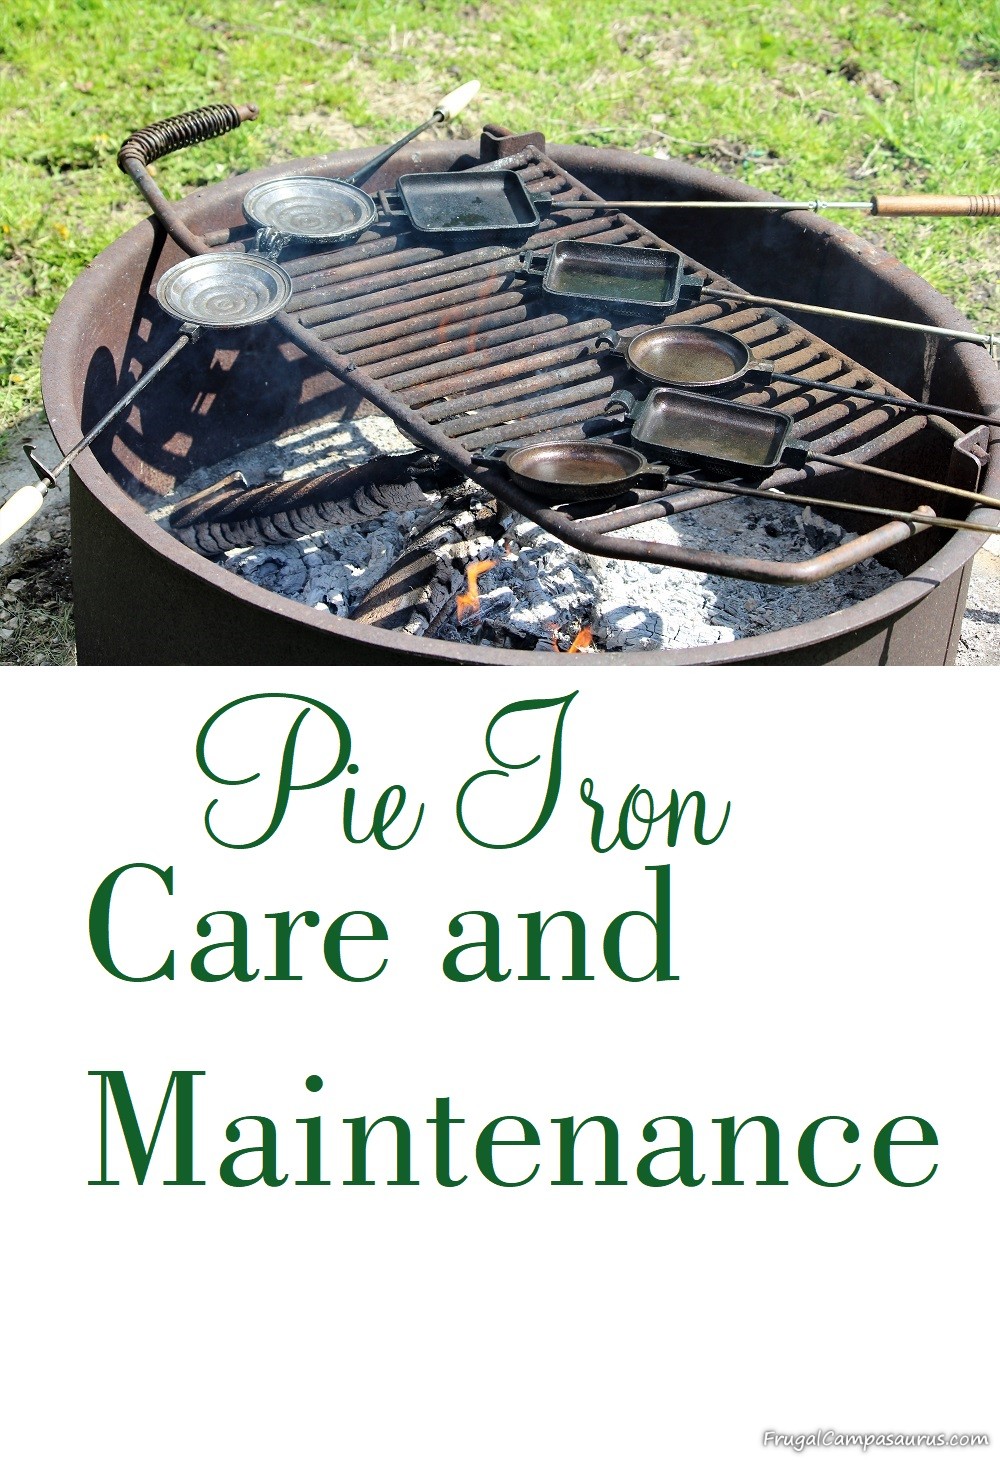 Pie Iron Care and Maintenance - Frugal Campasaurus